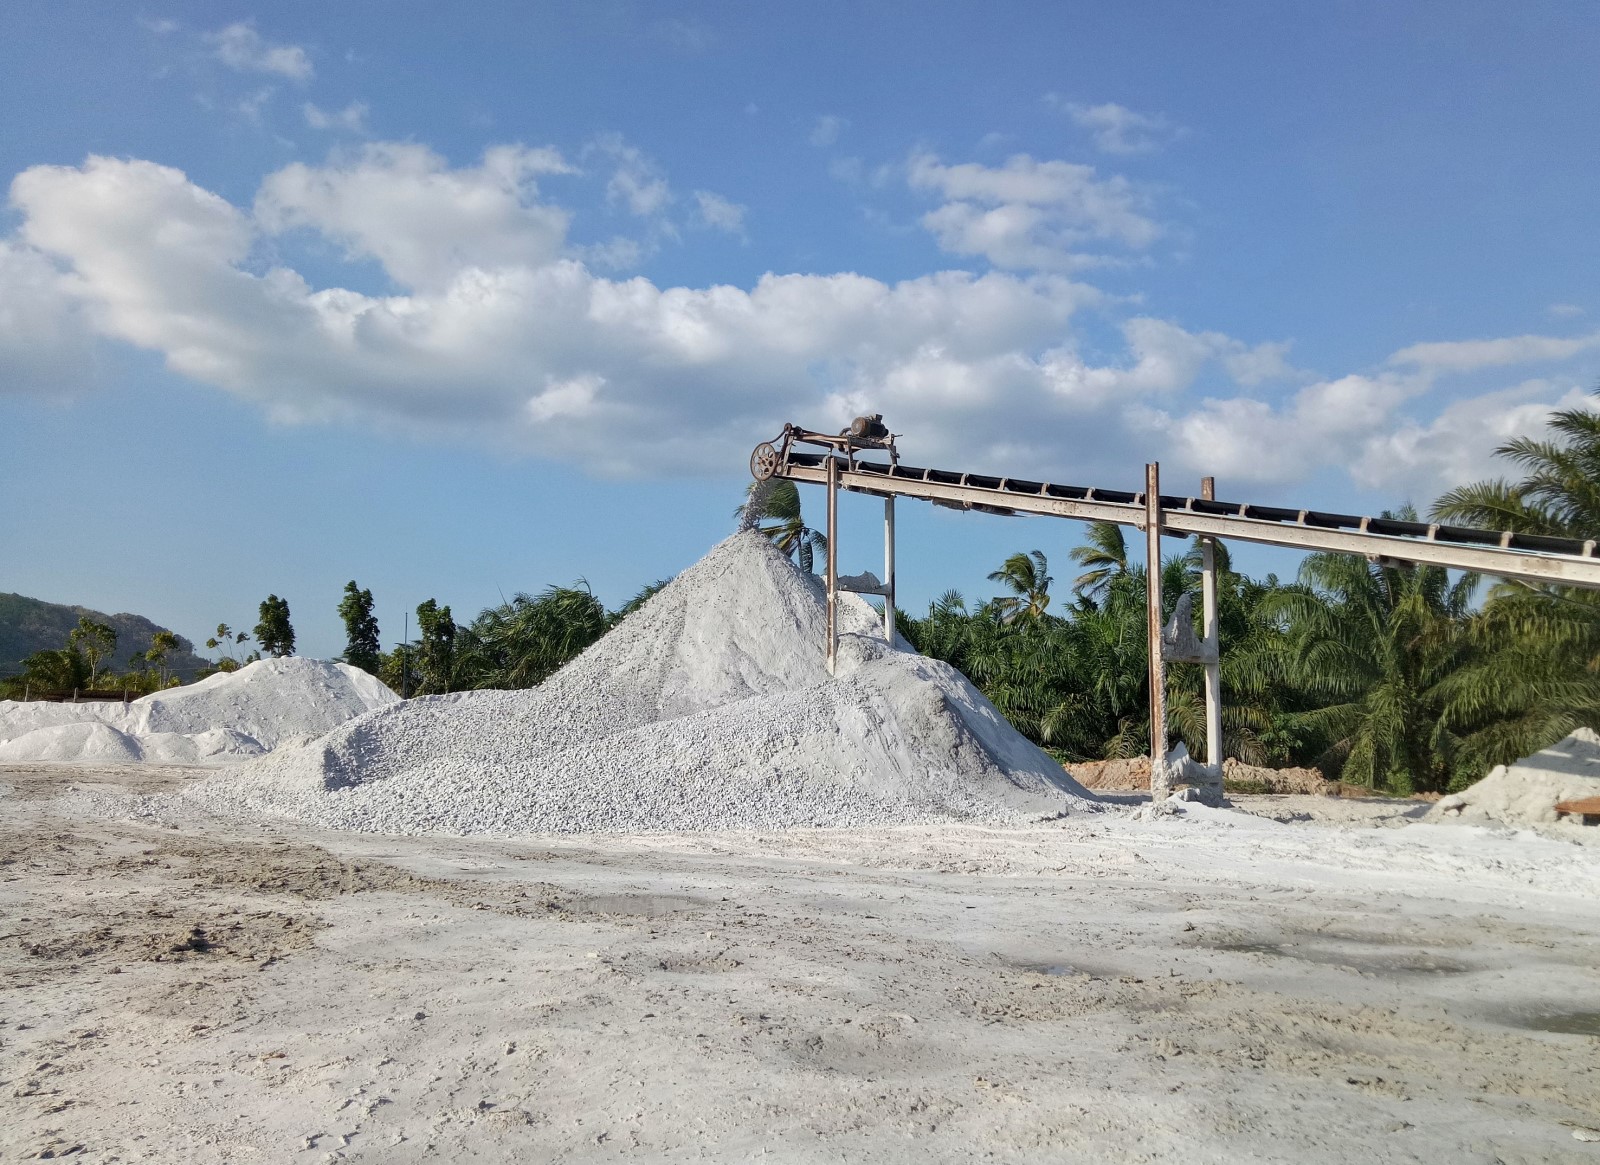 A gypsum conveyor helps move crushed gypsum to the next step in processing.